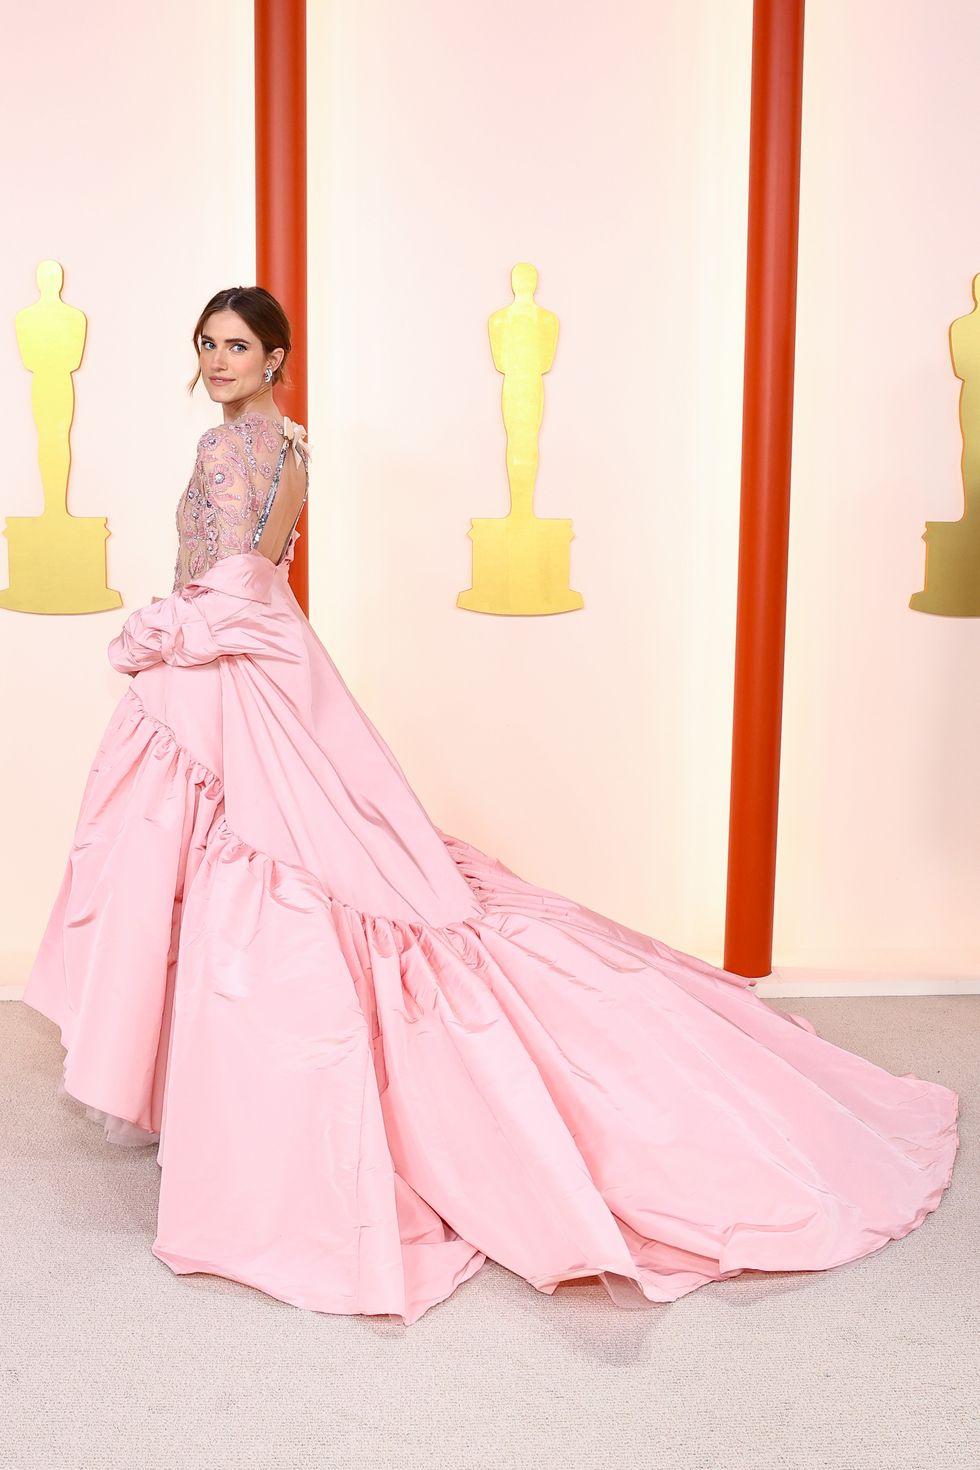 2023 Oscars Red Carpet: Best Looks From Arrivals, Show & Gala Ceremony –  Deadline